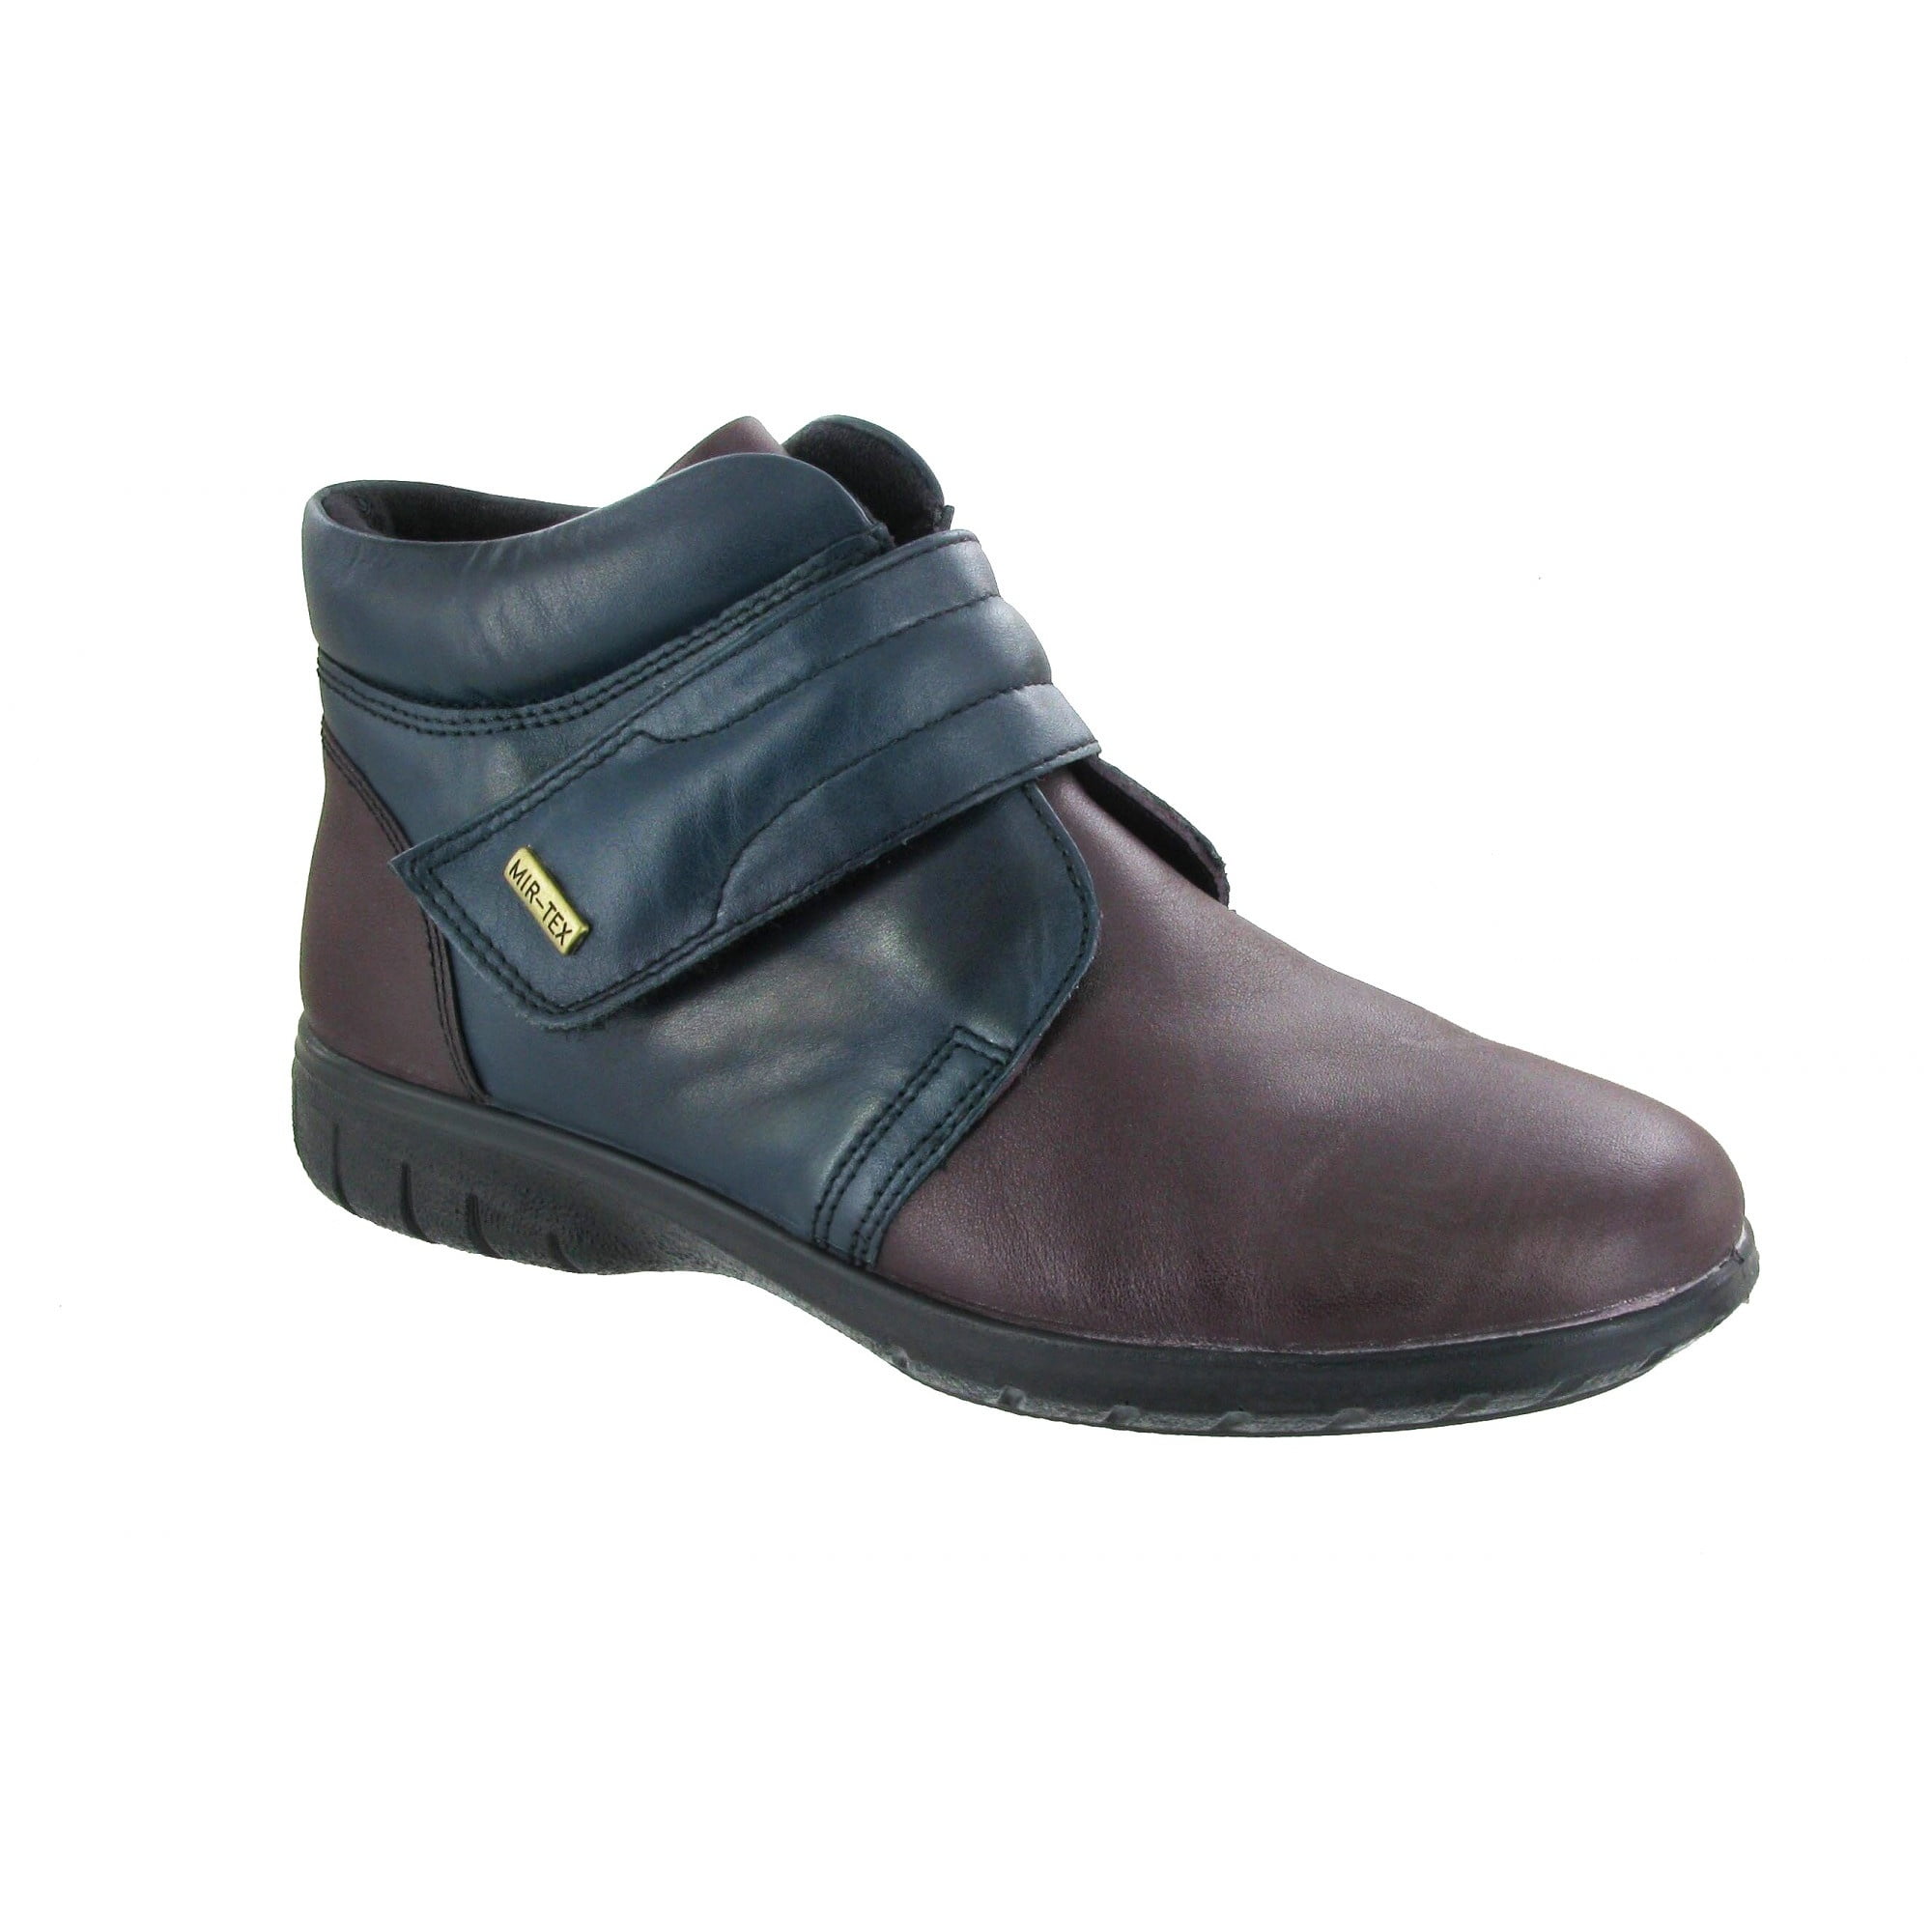 Cotswold chalford Para Mujer Damas Cuero Impermeable Acolchada Botines Marrón